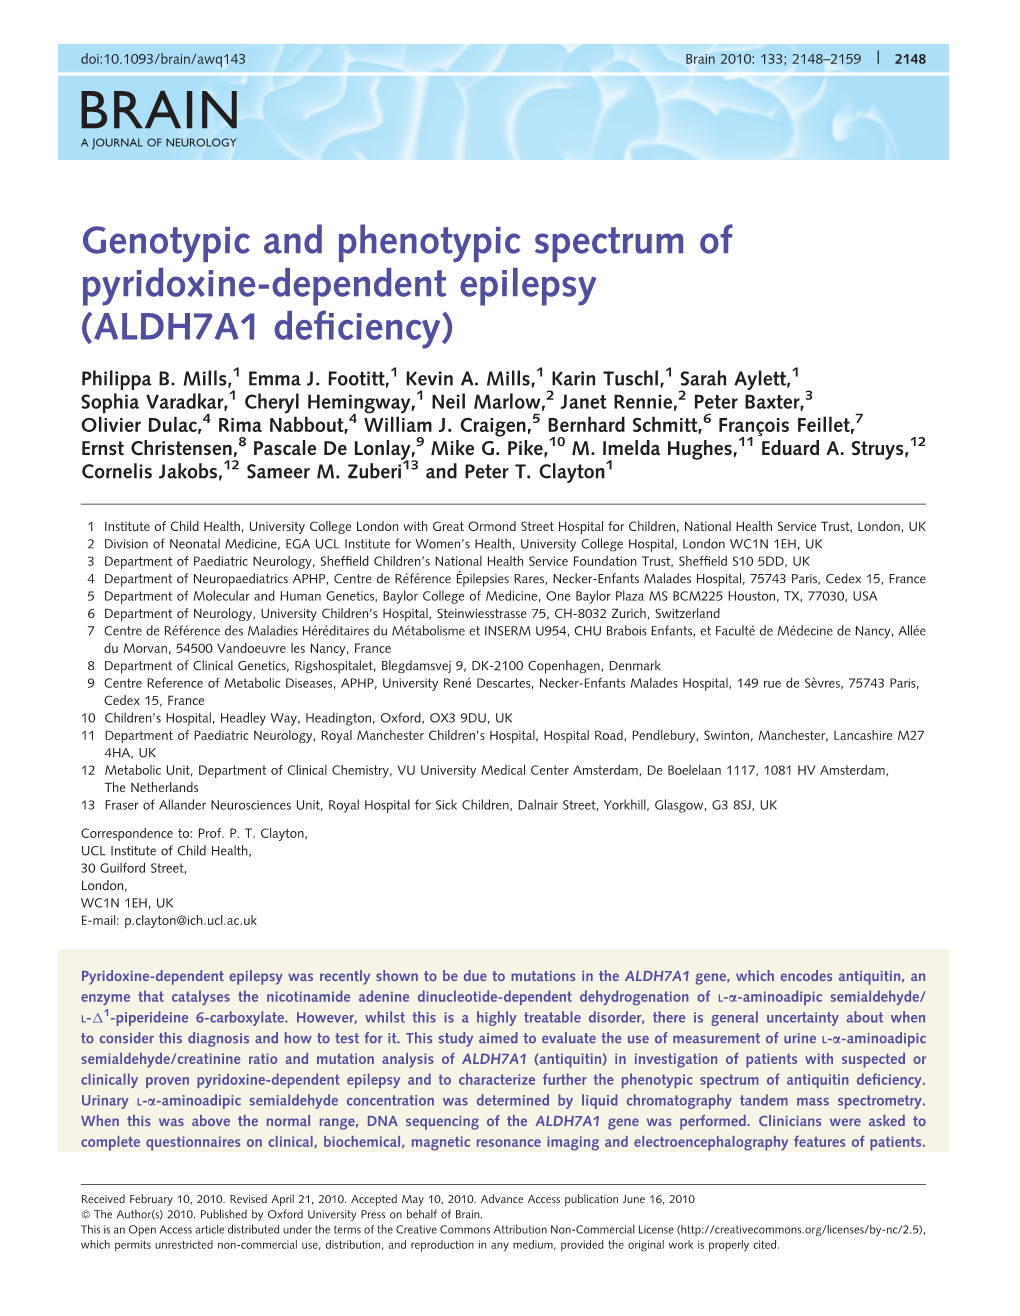 Genotypic and Phenotypic Spectrum of Pyridoxine-Dependent Epilepsy (ALDH7A1 Deficiency)